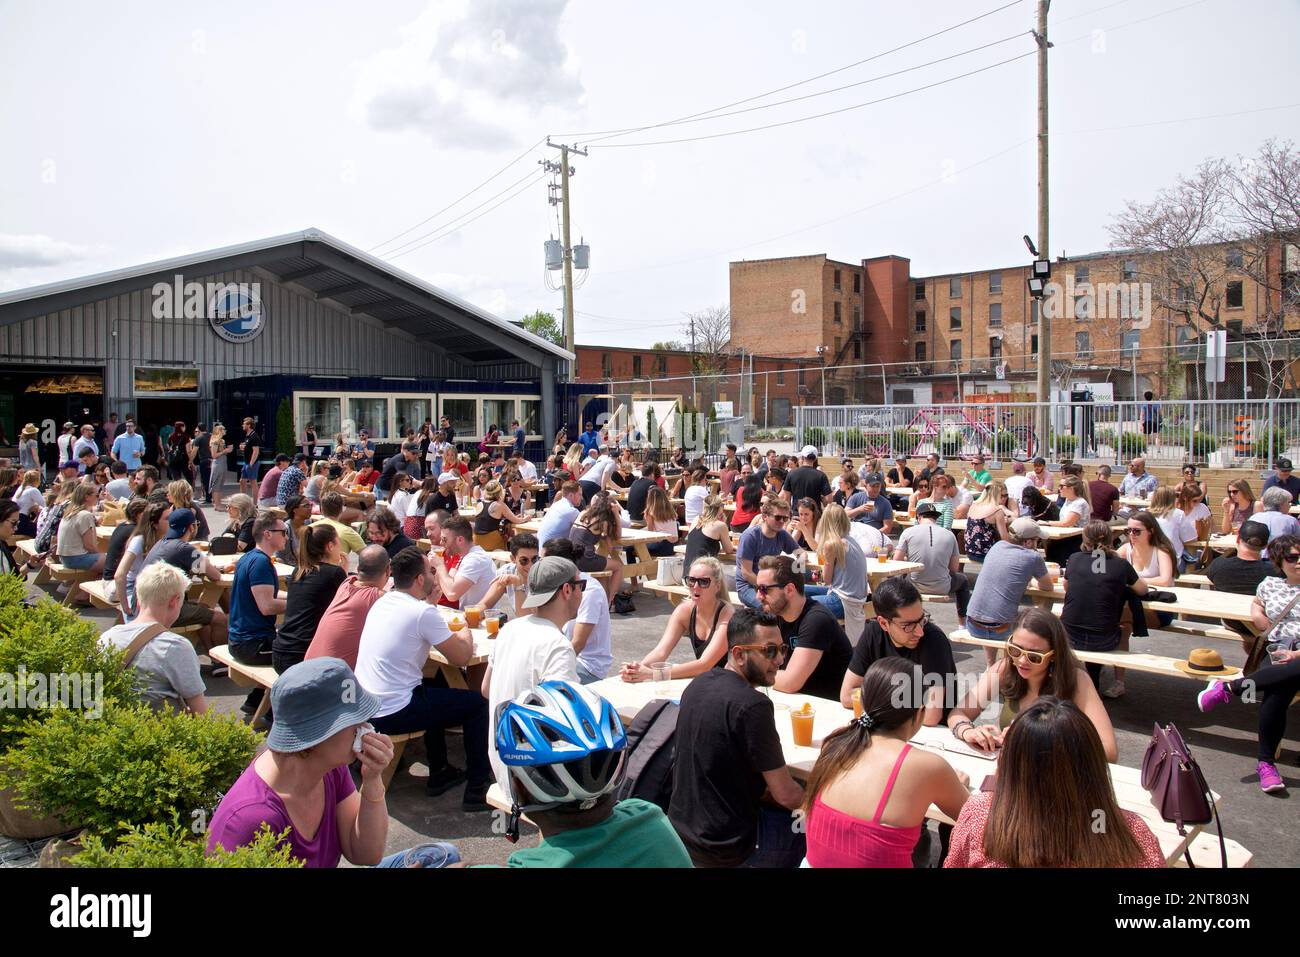 Toronto, Ontario / Canada - May 26, 2019: City lifestyle of drinking beer at the outdoor beer garden Stock Photo